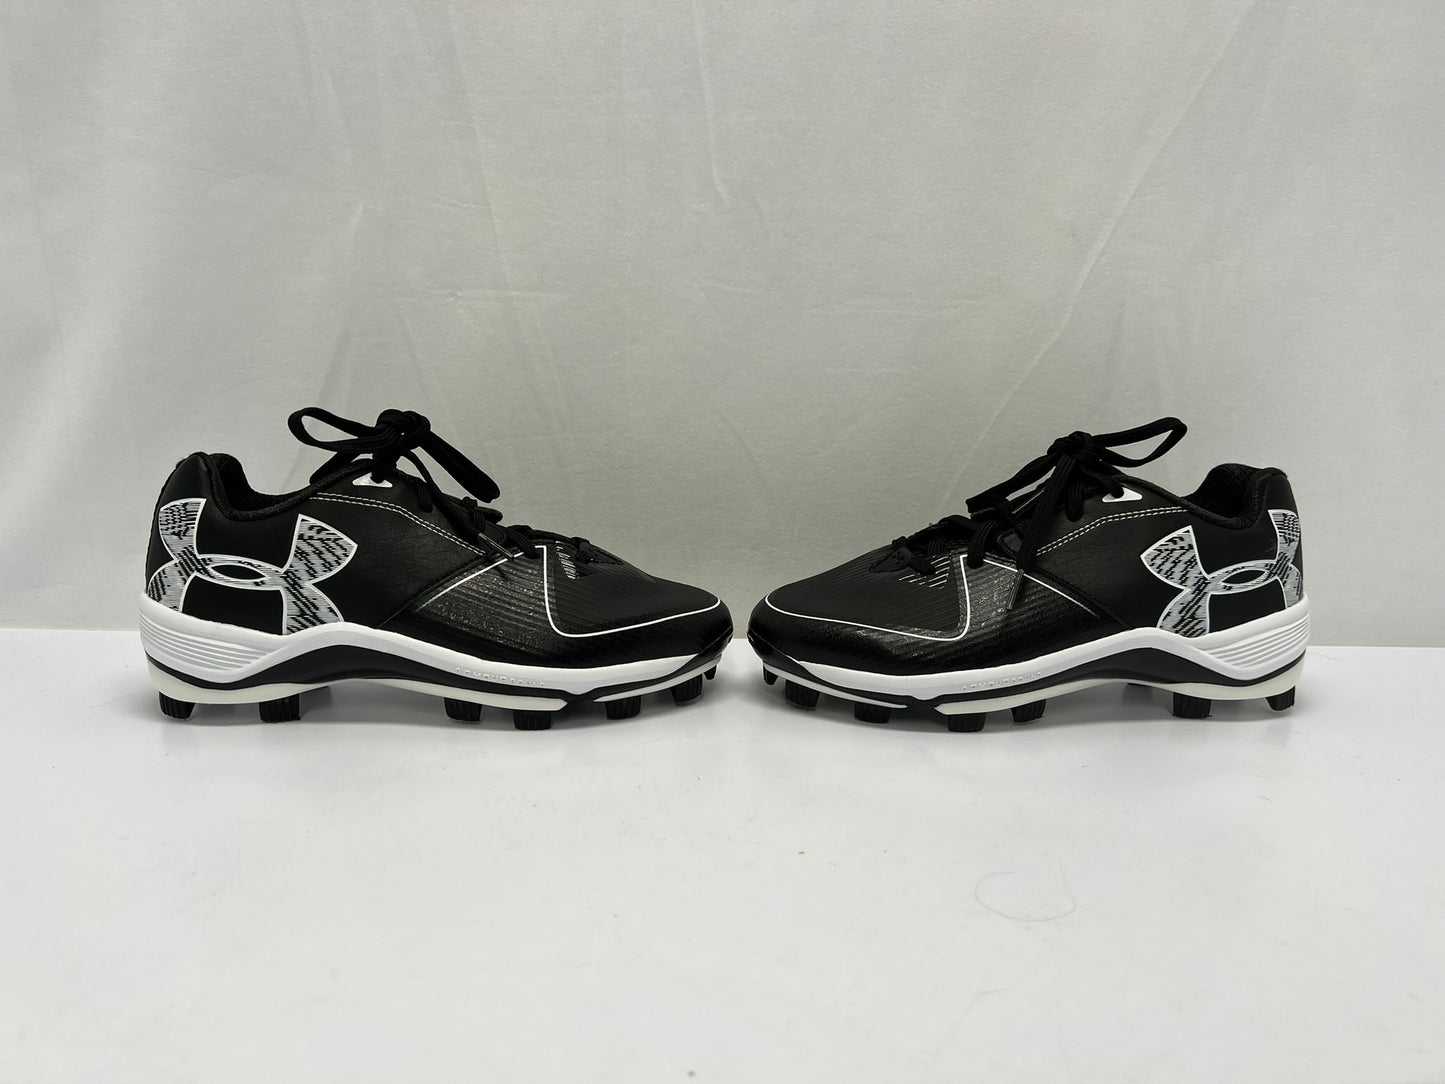 Baseball Shoes Cleats Men's Size 7.5 Under Armour Black White As New